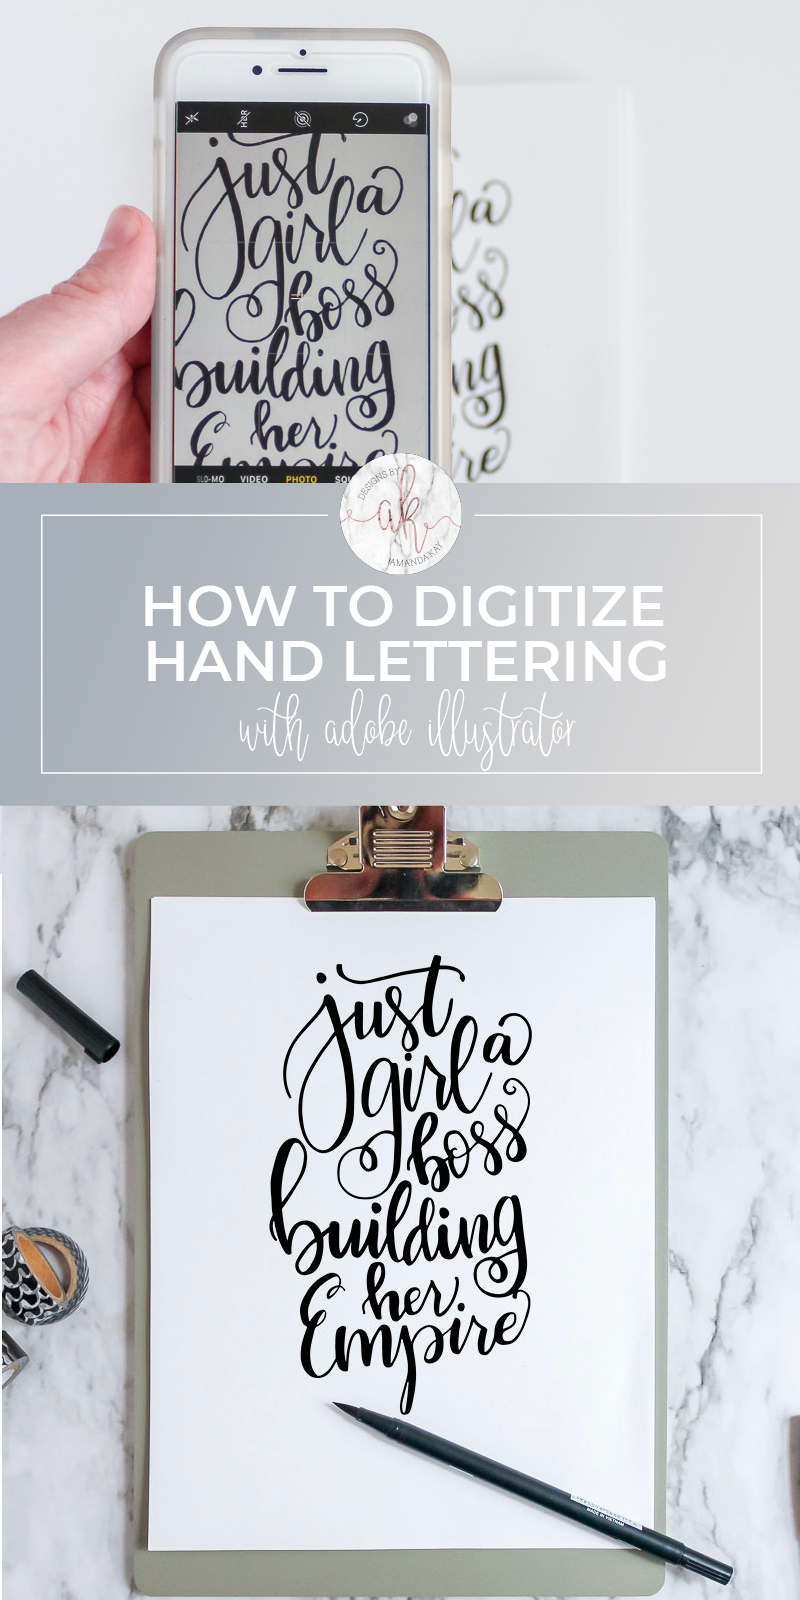 How to Digitize Hand Lettering